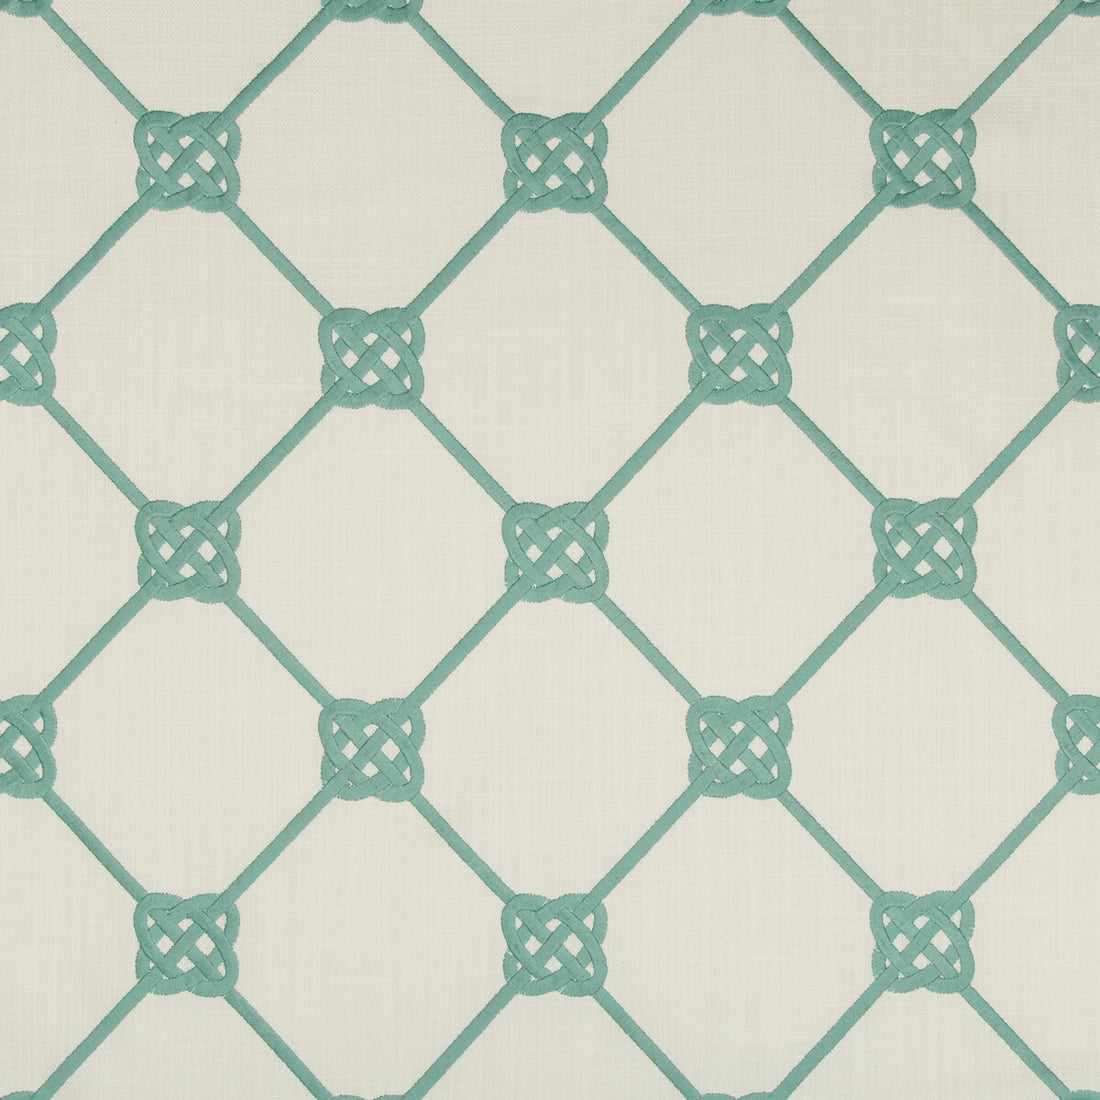 Knotbridge fabric in surf color - pattern 35540.135.0 - by Kravet Basics in the Bermuda collection